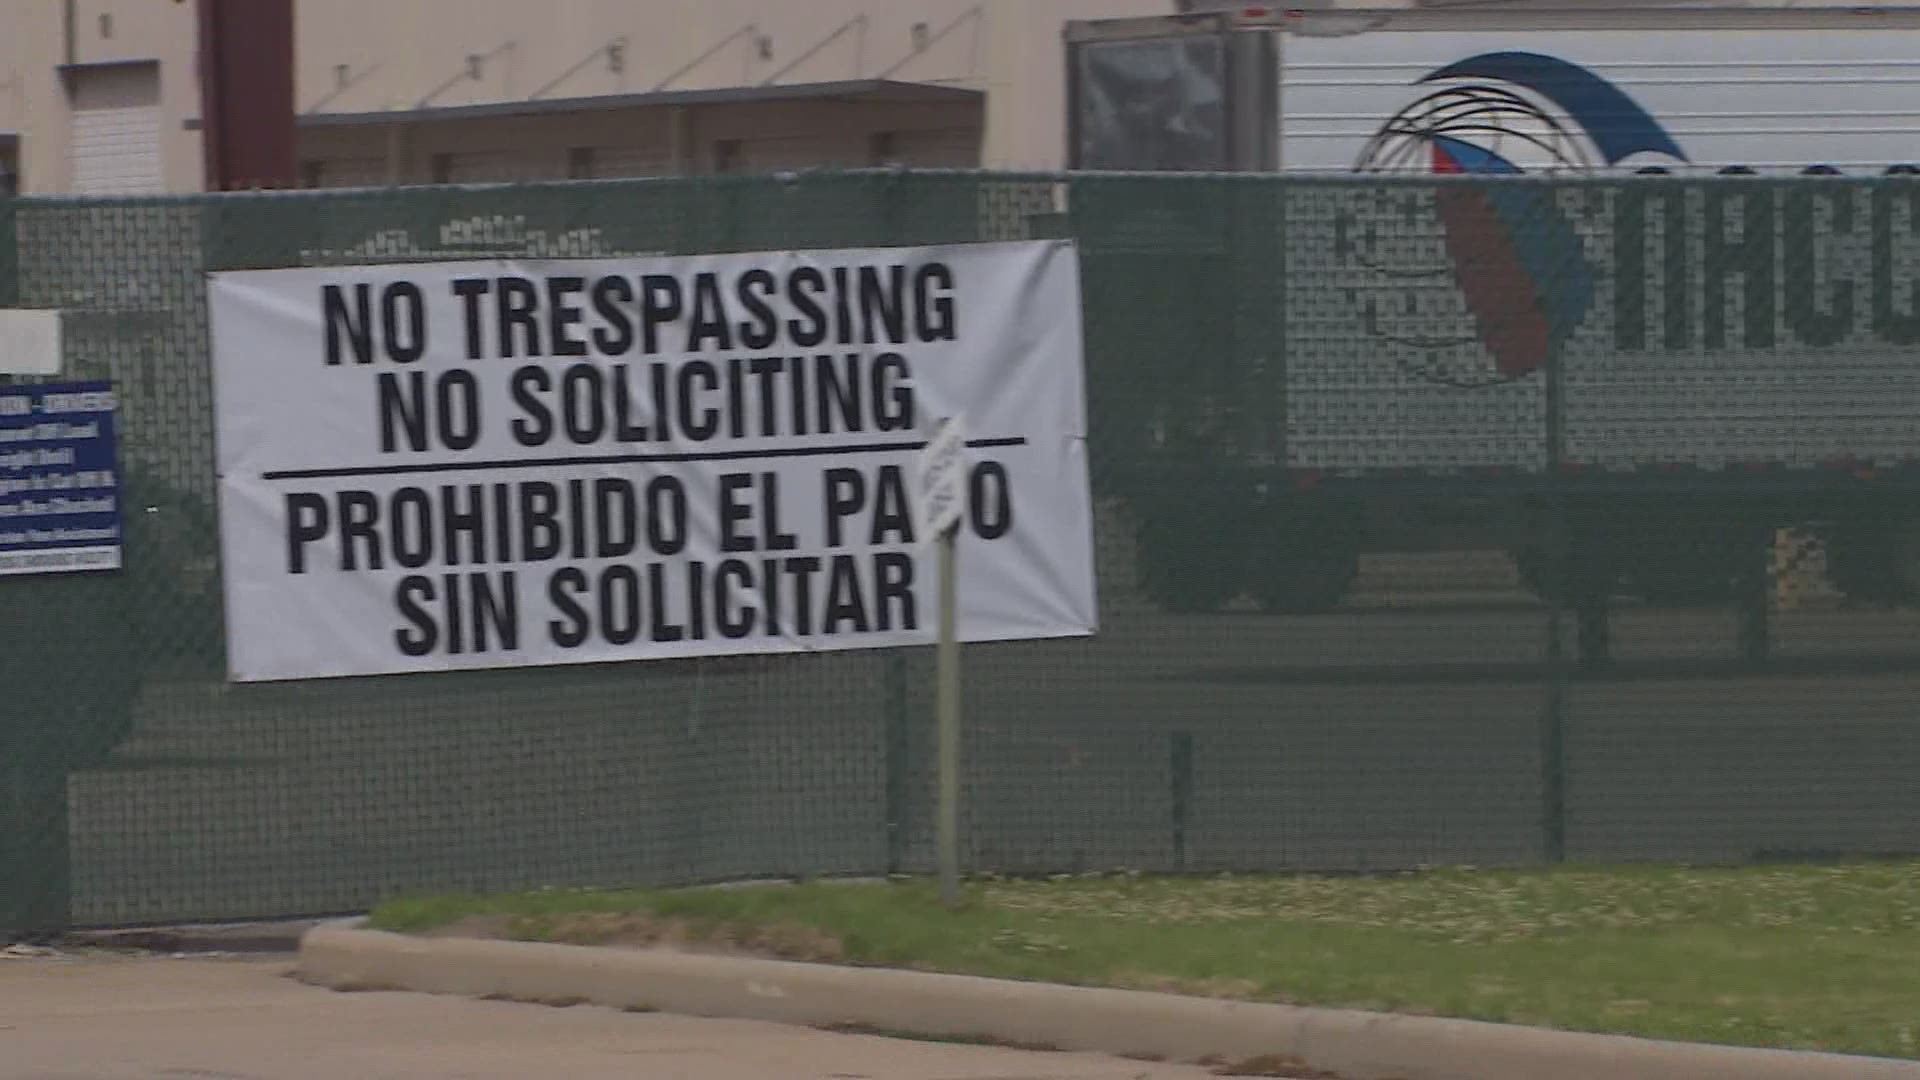 Rep. Sylvia Garcia toured the Houston site after allegations of misconduct surfaced at a similar site in San Antonio. She's calling on Congress to provide oversight.